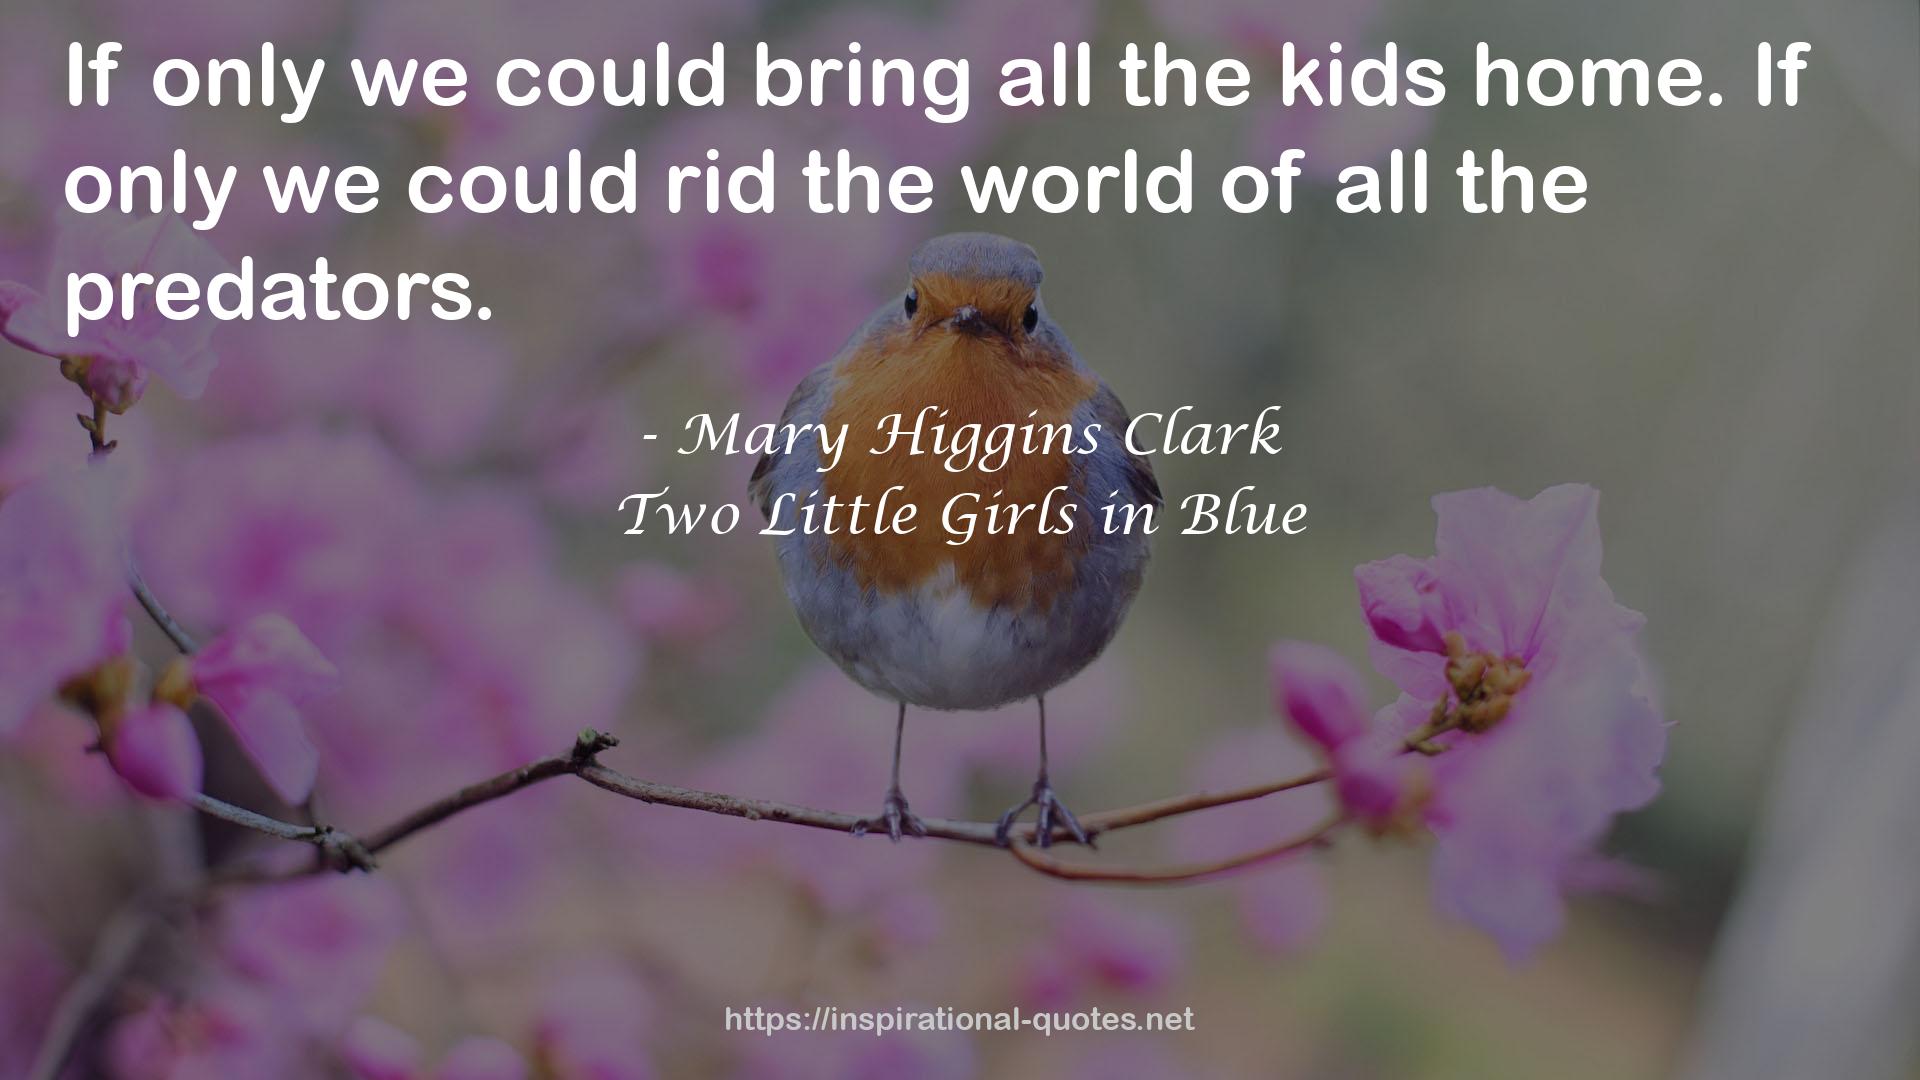 Two Little Girls in Blue QUOTES